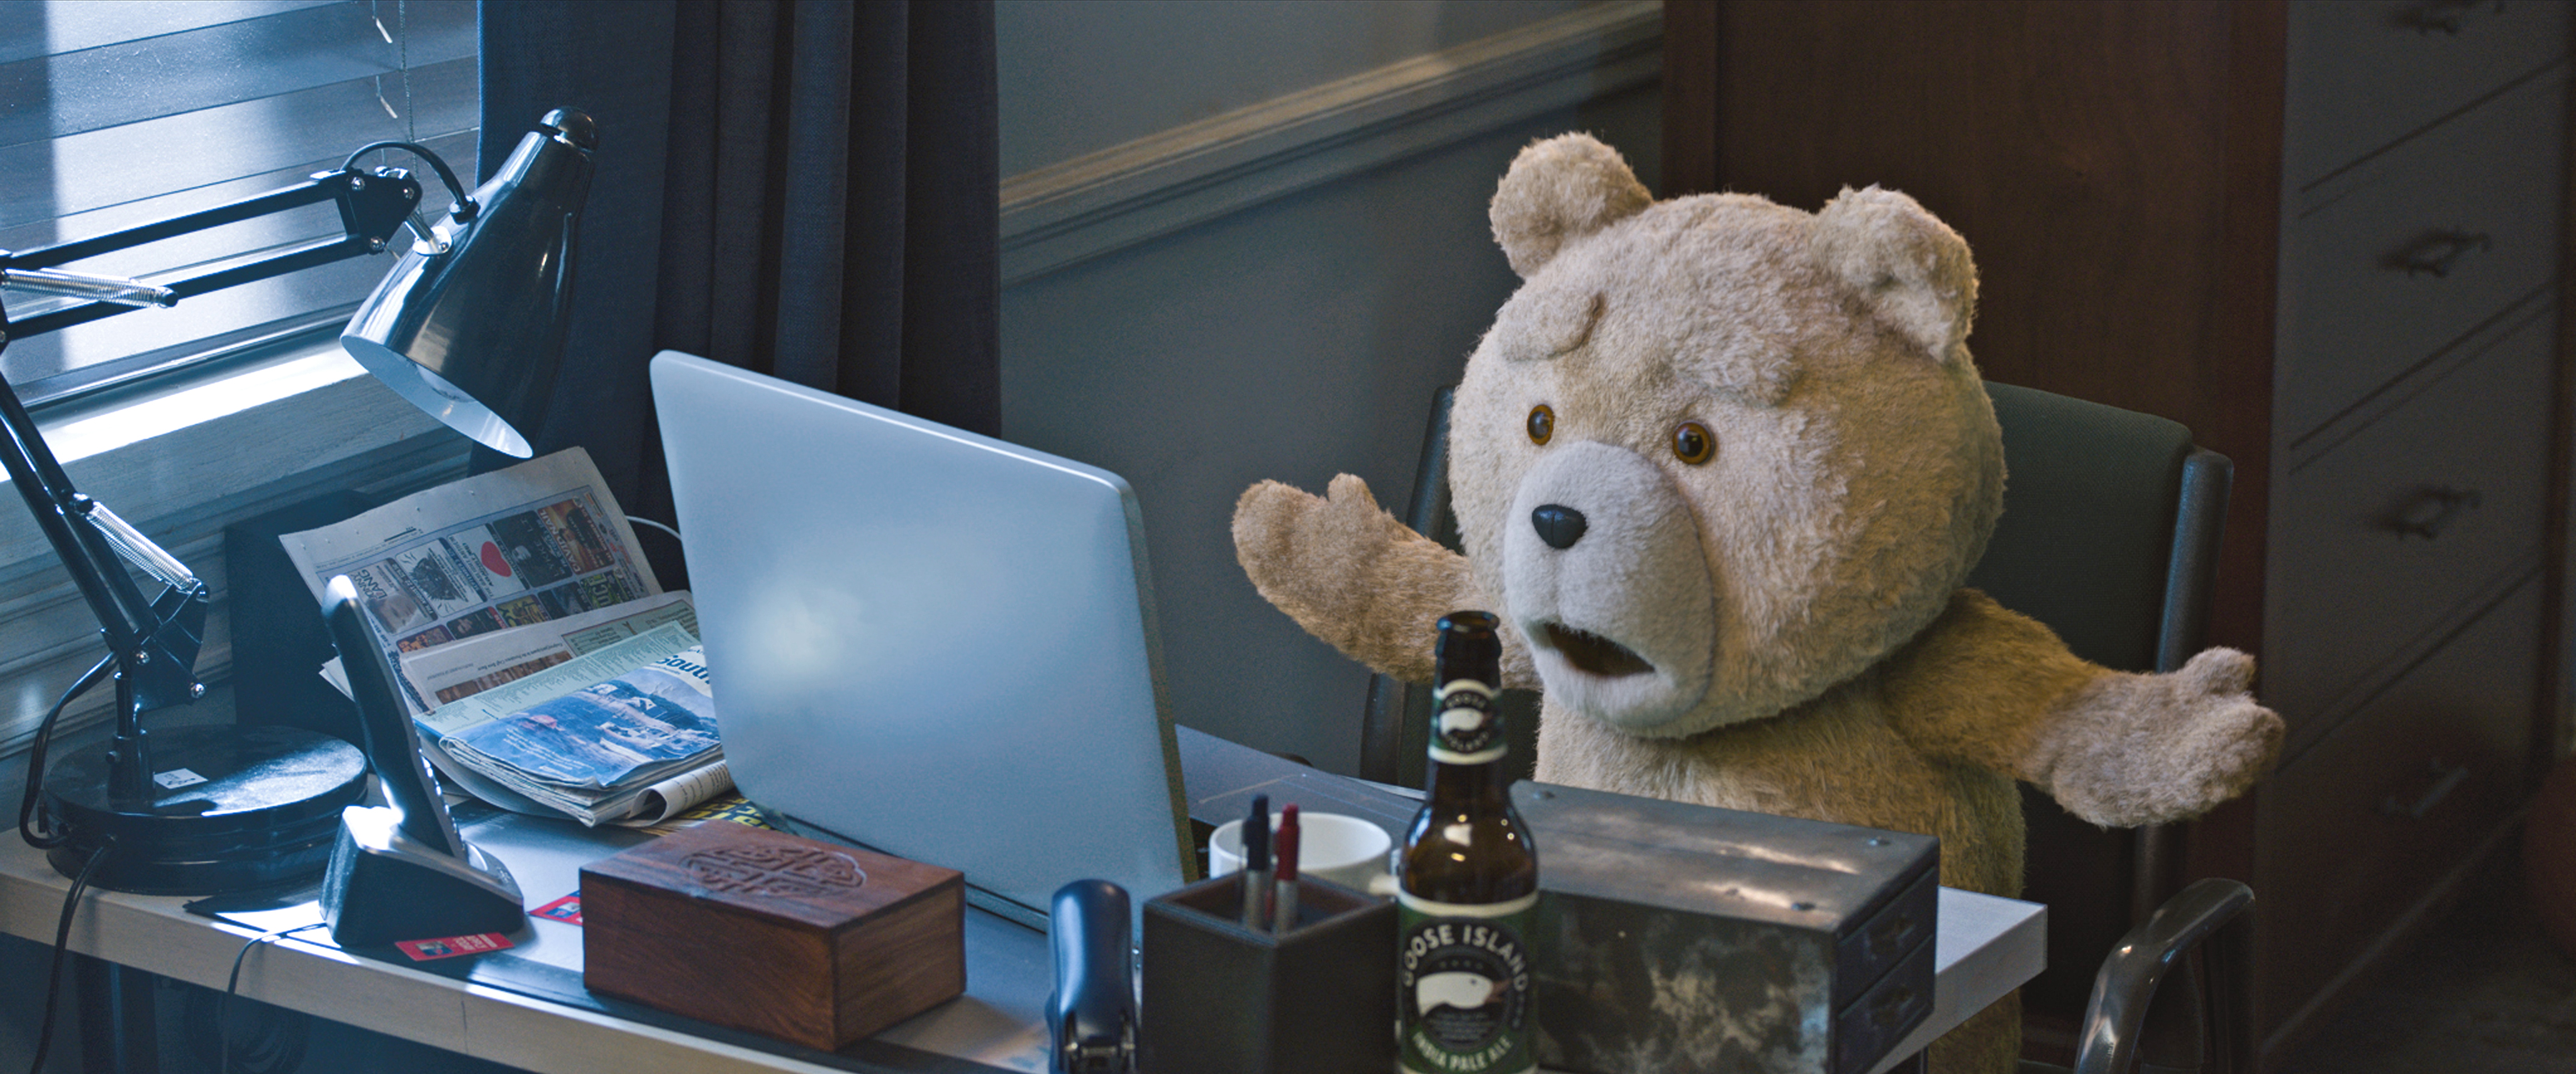 movie, ted 2, desk, ted (movie character), teddy bear cellphone